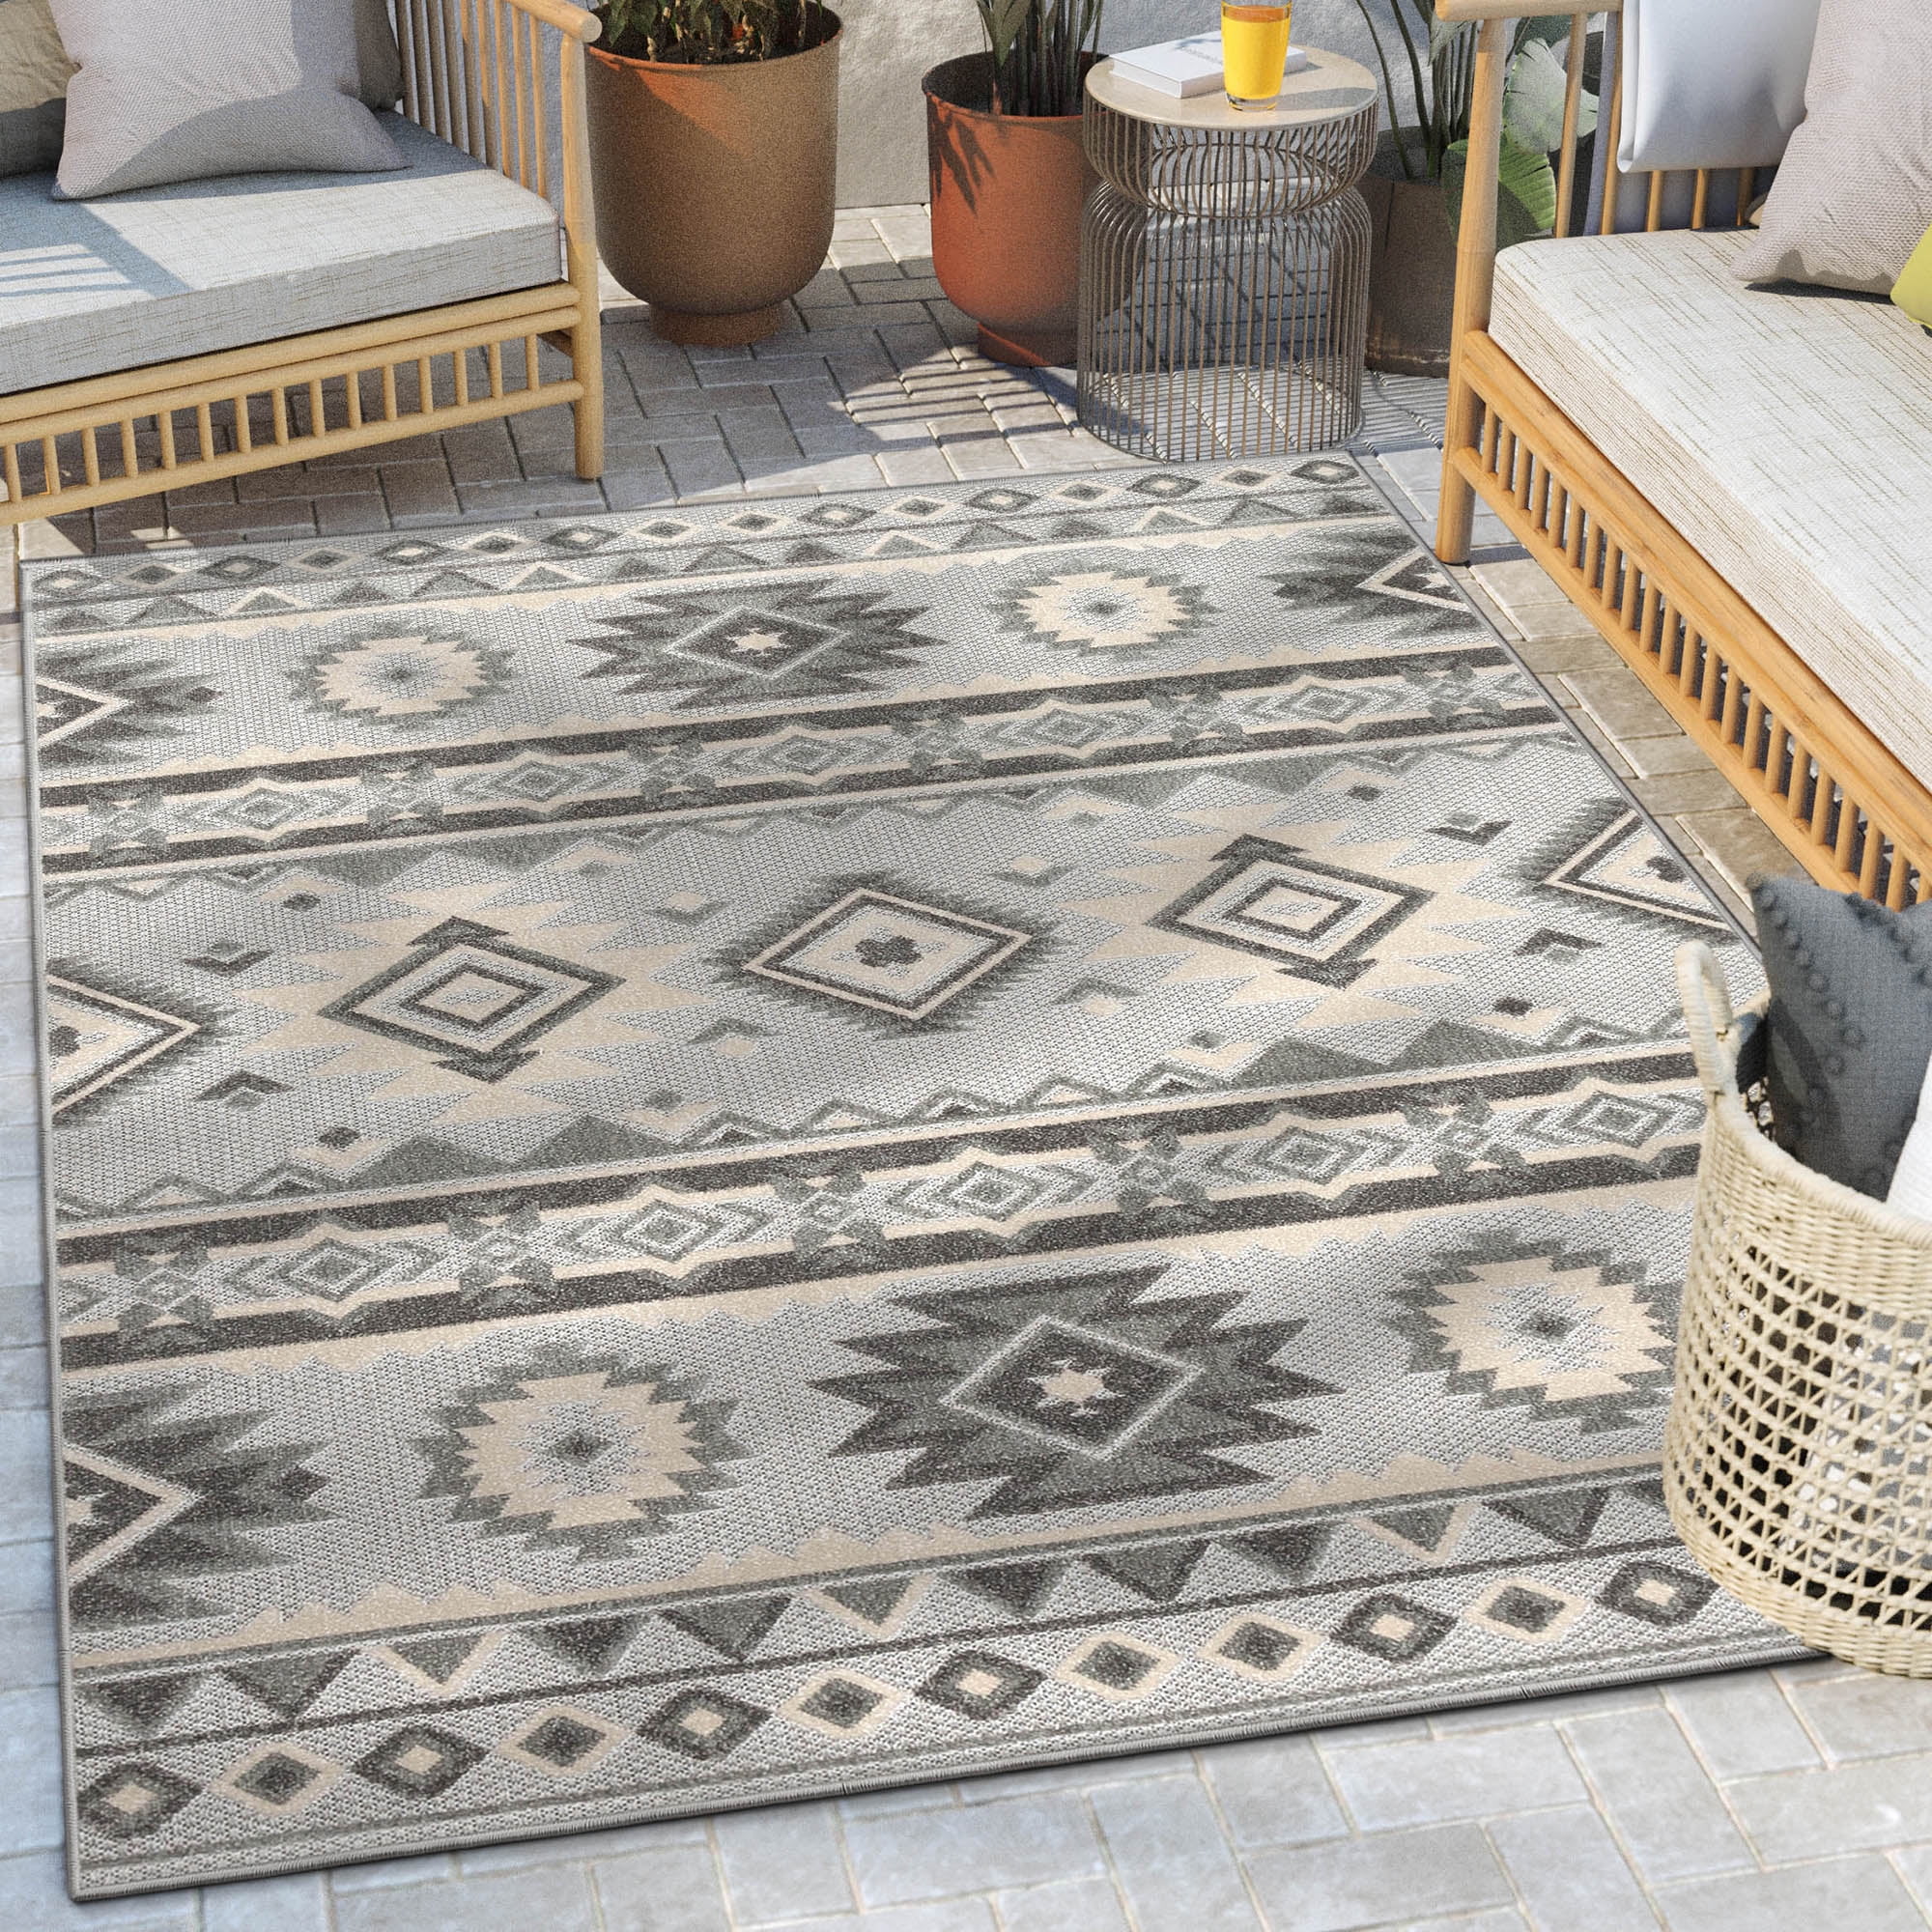 Grey Flatweave Rugs for Indoor Outdoor Robust Long Lasting Stone Geometric Mats 